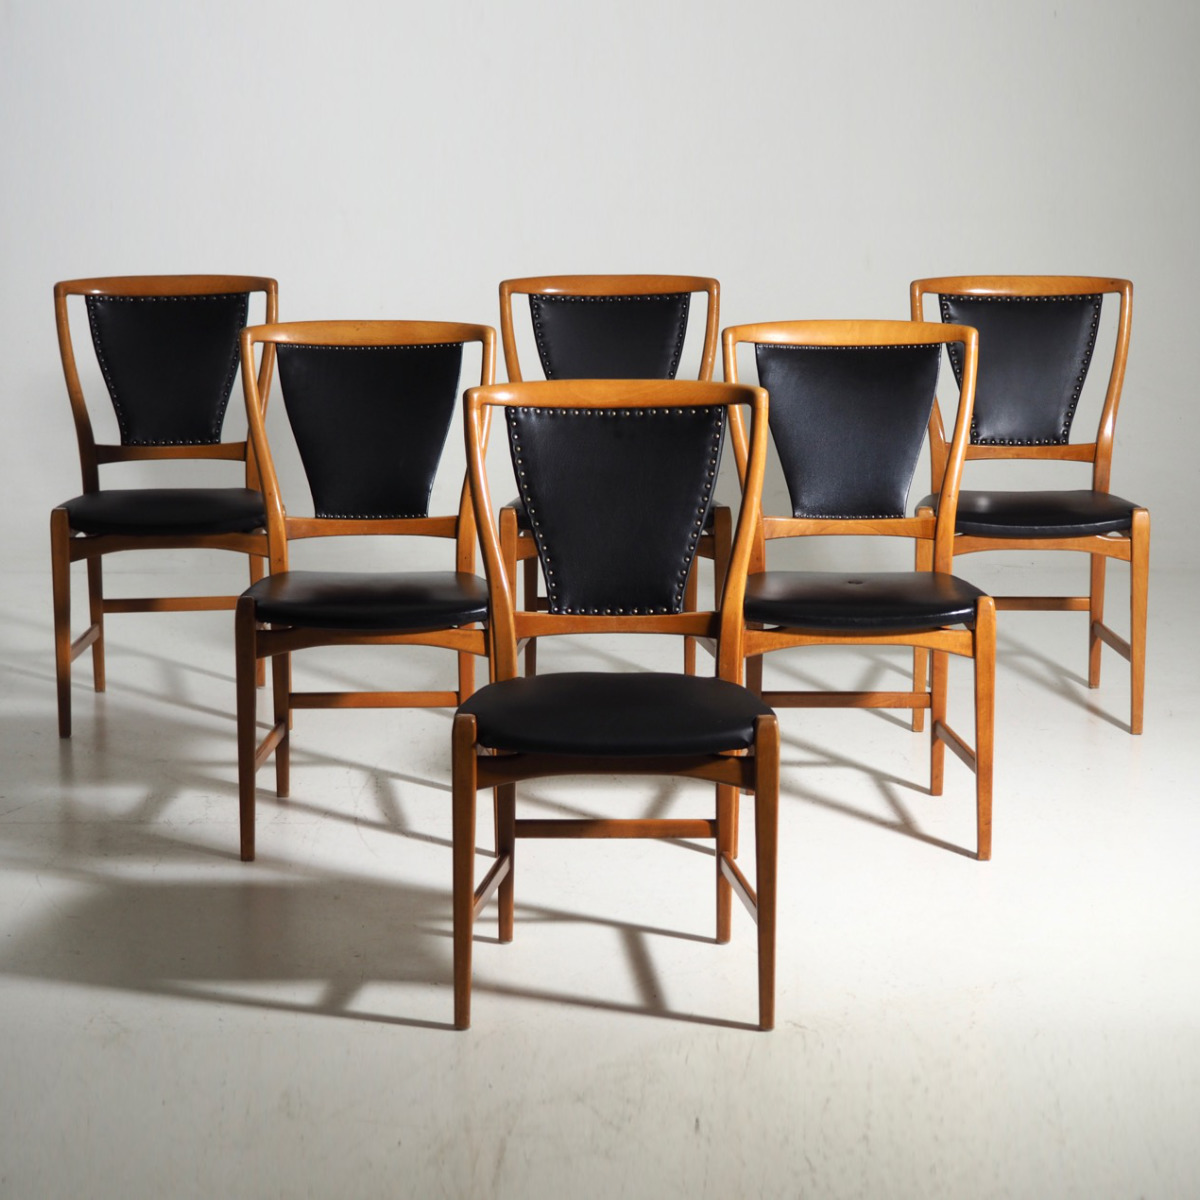 13212 1d Six Chairs In Fruitwood And Imitation Leather